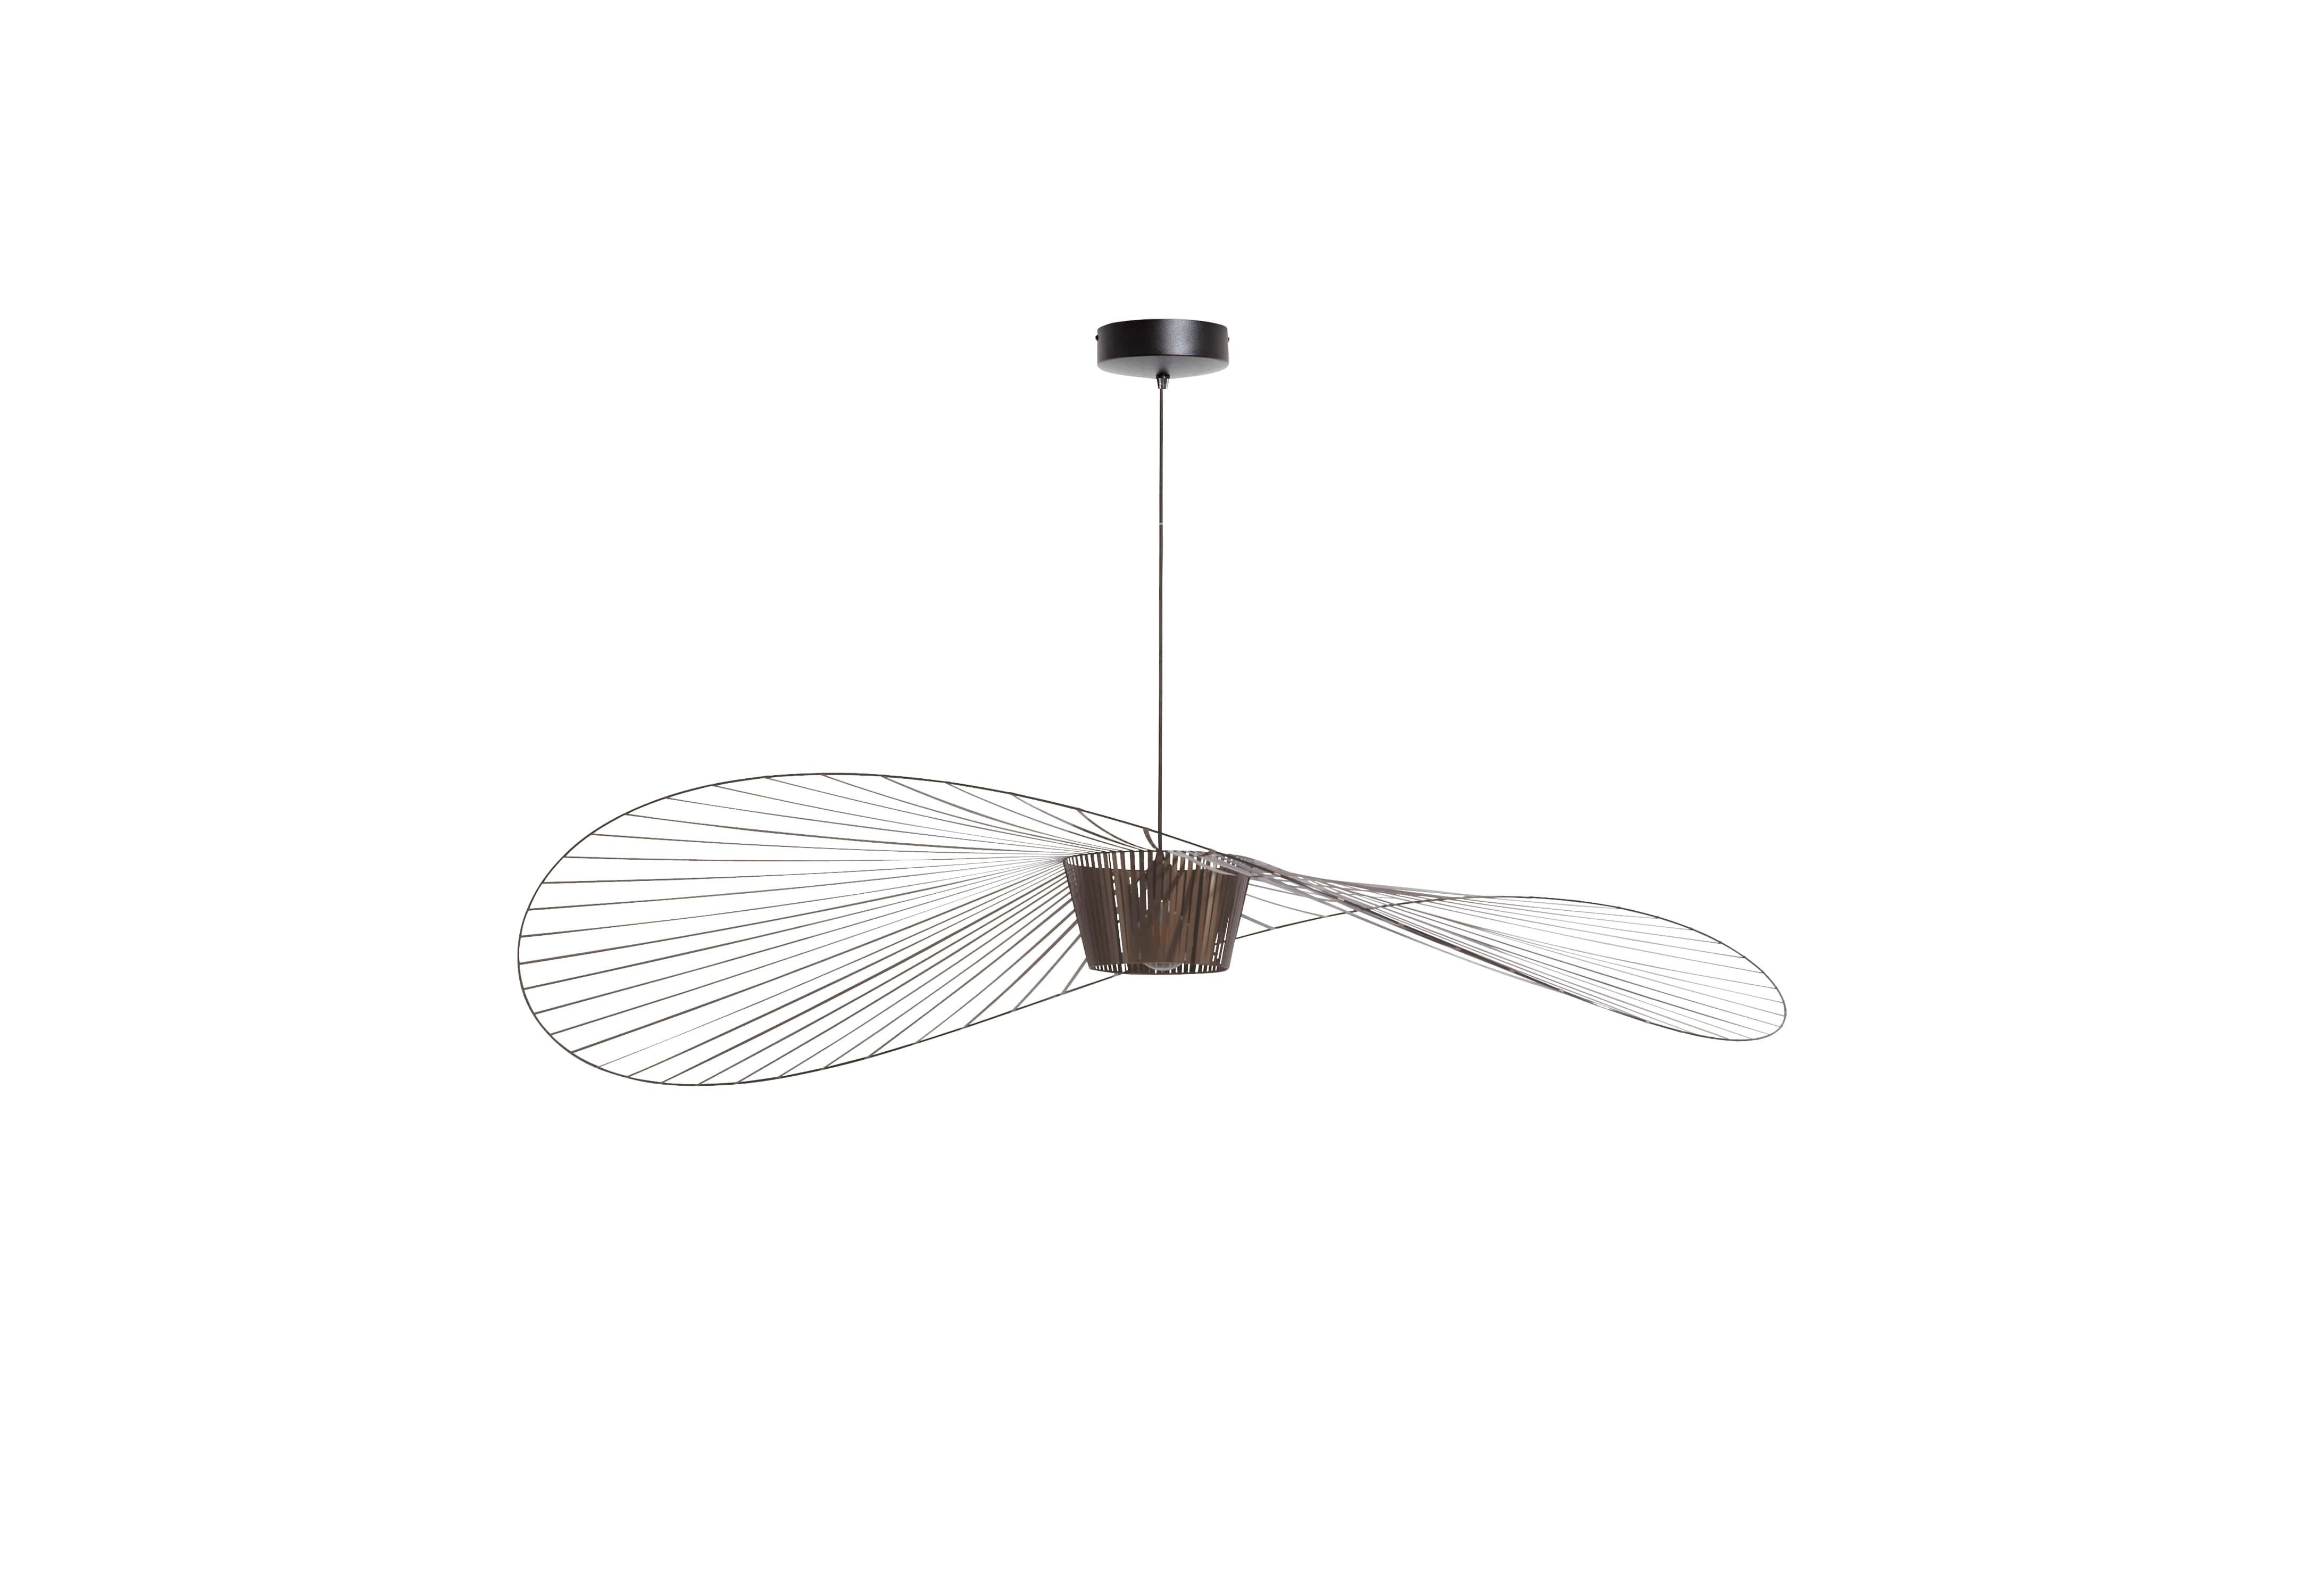 Petite Friture Large Vertigo Pendant Light in Bronze by Constance Guisset, 2010

Edited by Petite Friture in 2010, the Vertigo pendant light is now an icon of contemporary design. With its ultra-light fiberglass structure, stretched with velvety